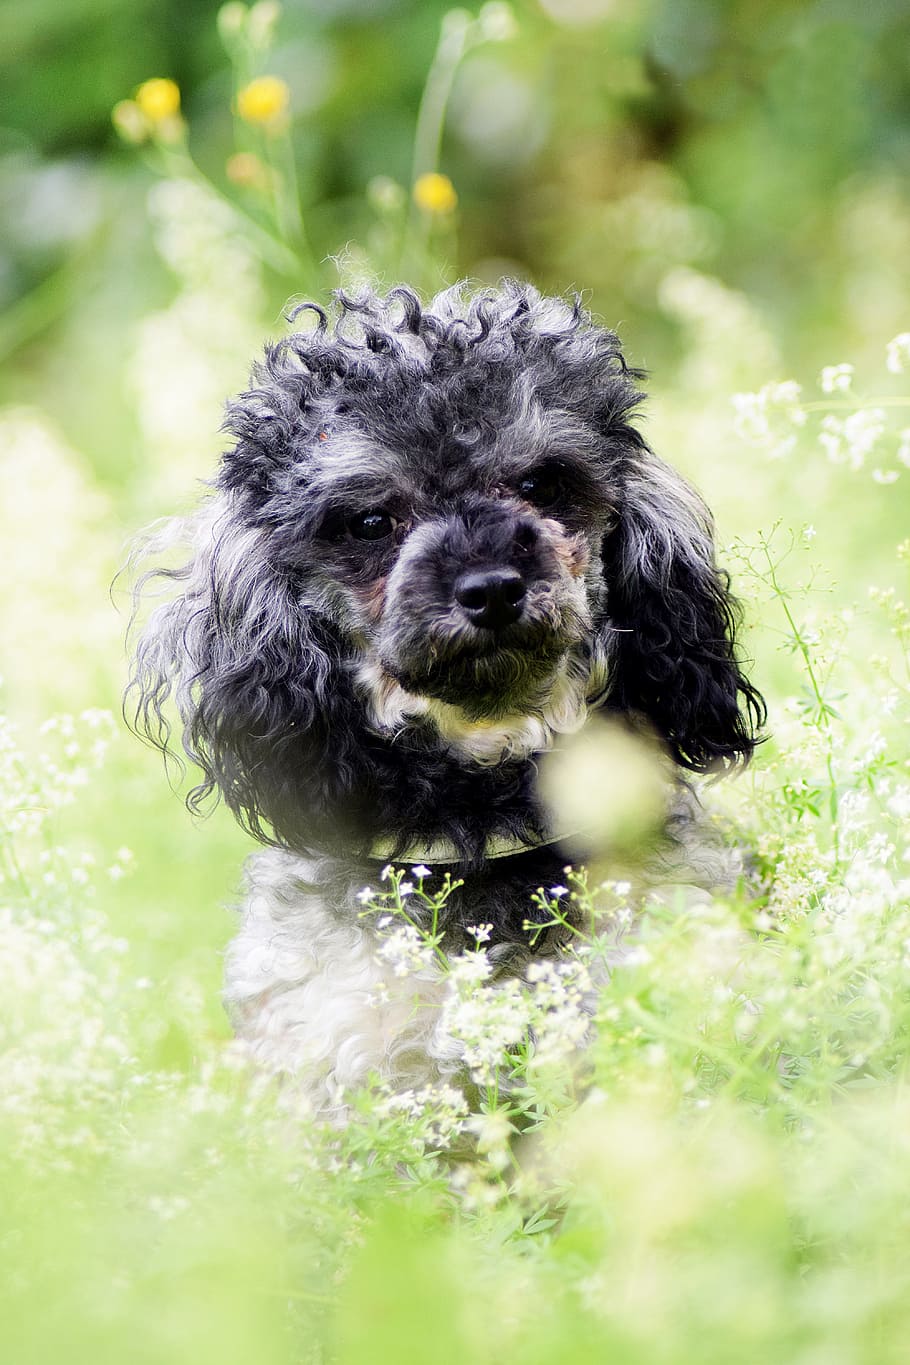 Miniature Poodle, Poodle, Dog, dog, poodle, summer, meadow, green, cute, sweet, pets